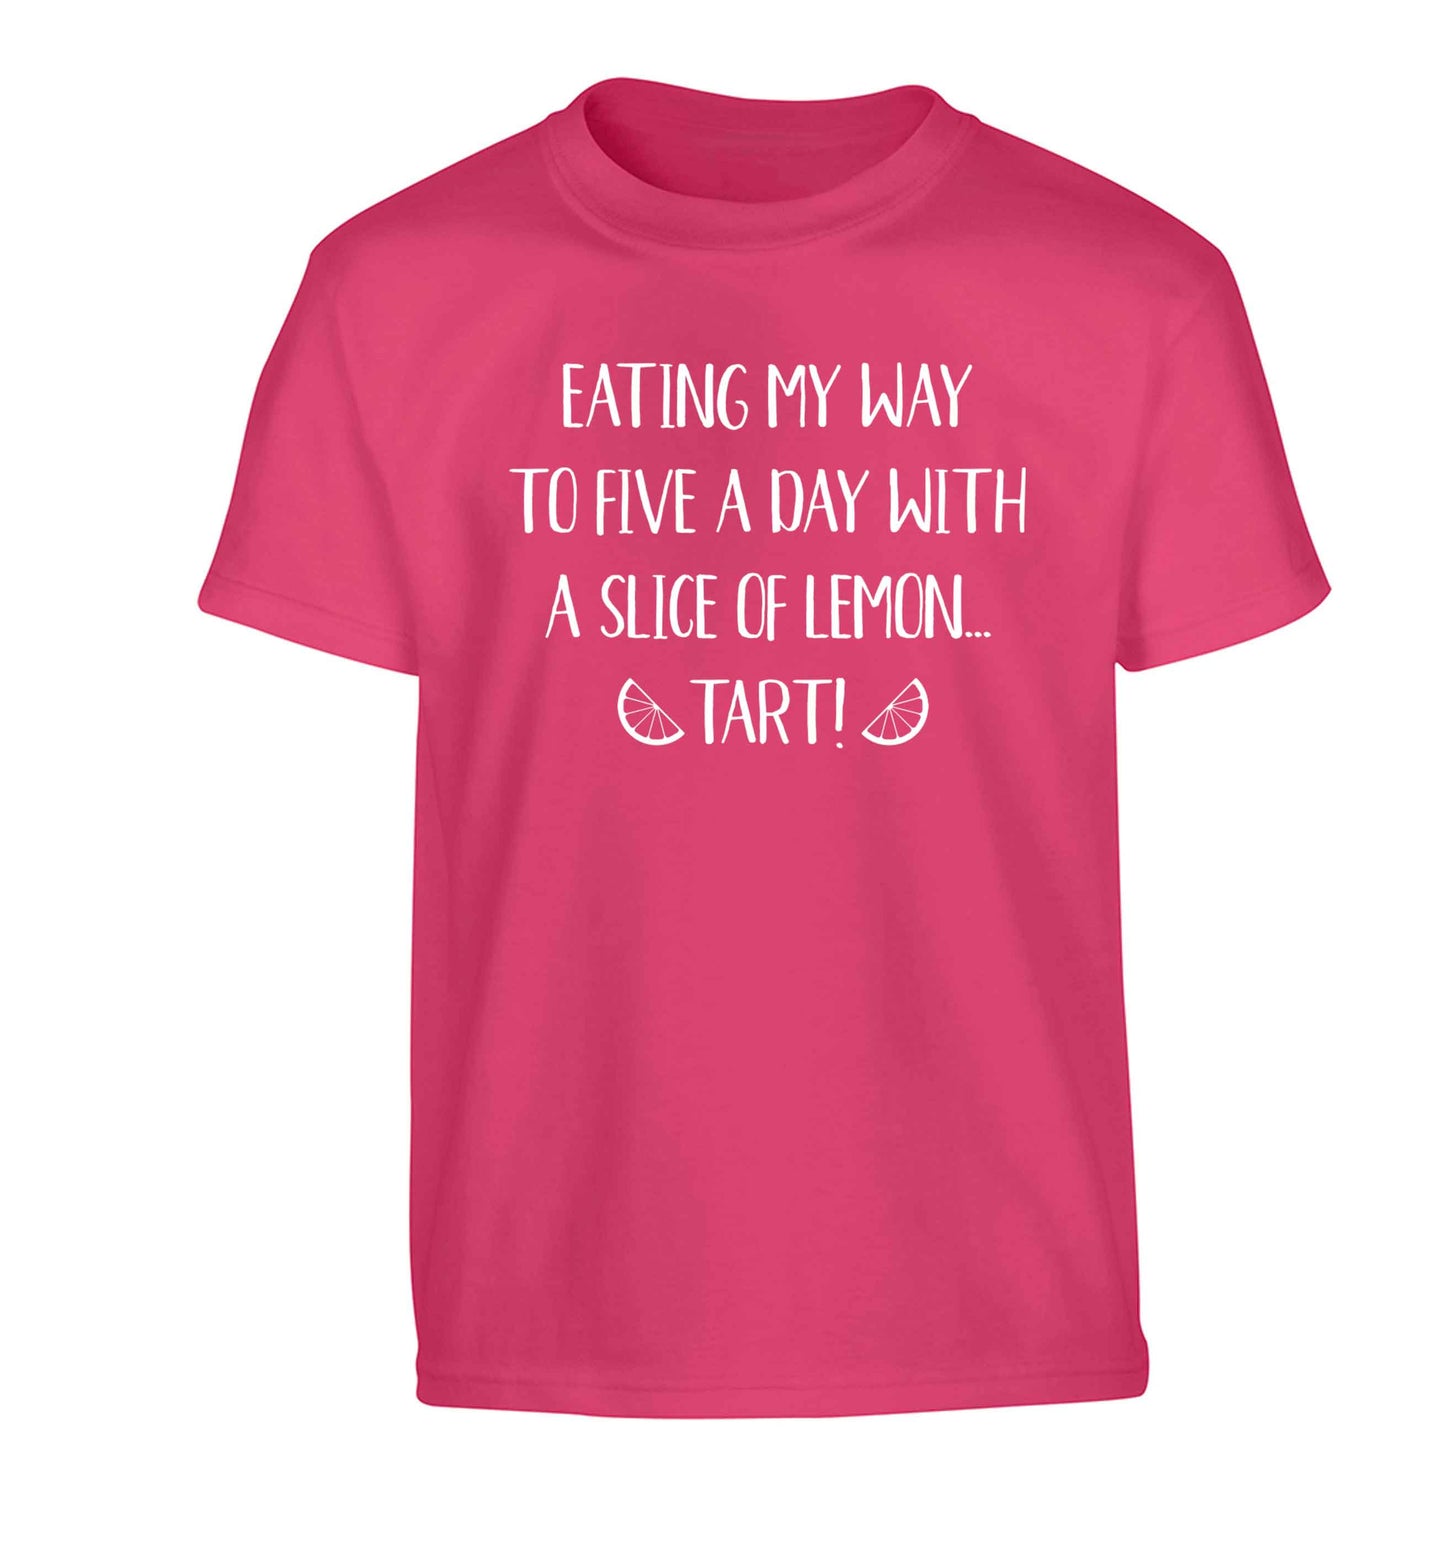 Eating my way to five a day with a slice of lemon tart Children's pink Tshirt 12-13 Years